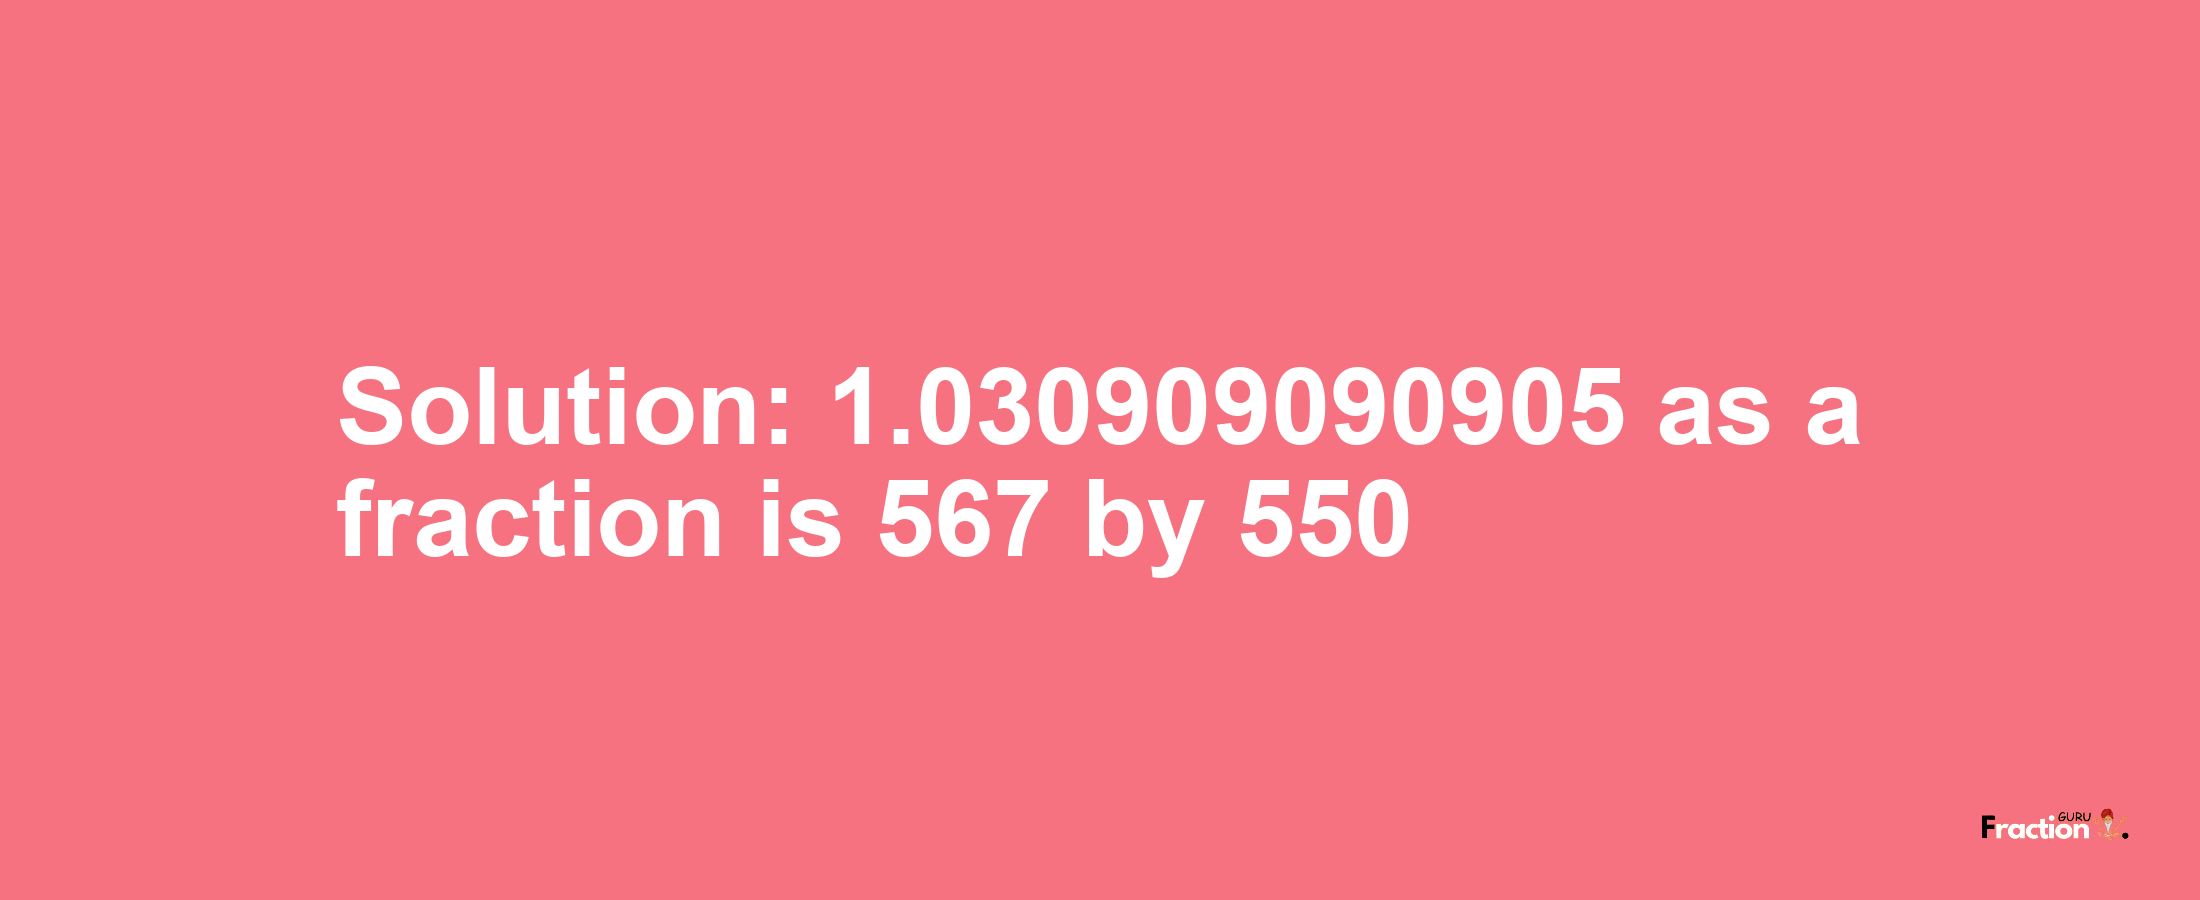 Solution:1.030909090905 as a fraction is 567/550